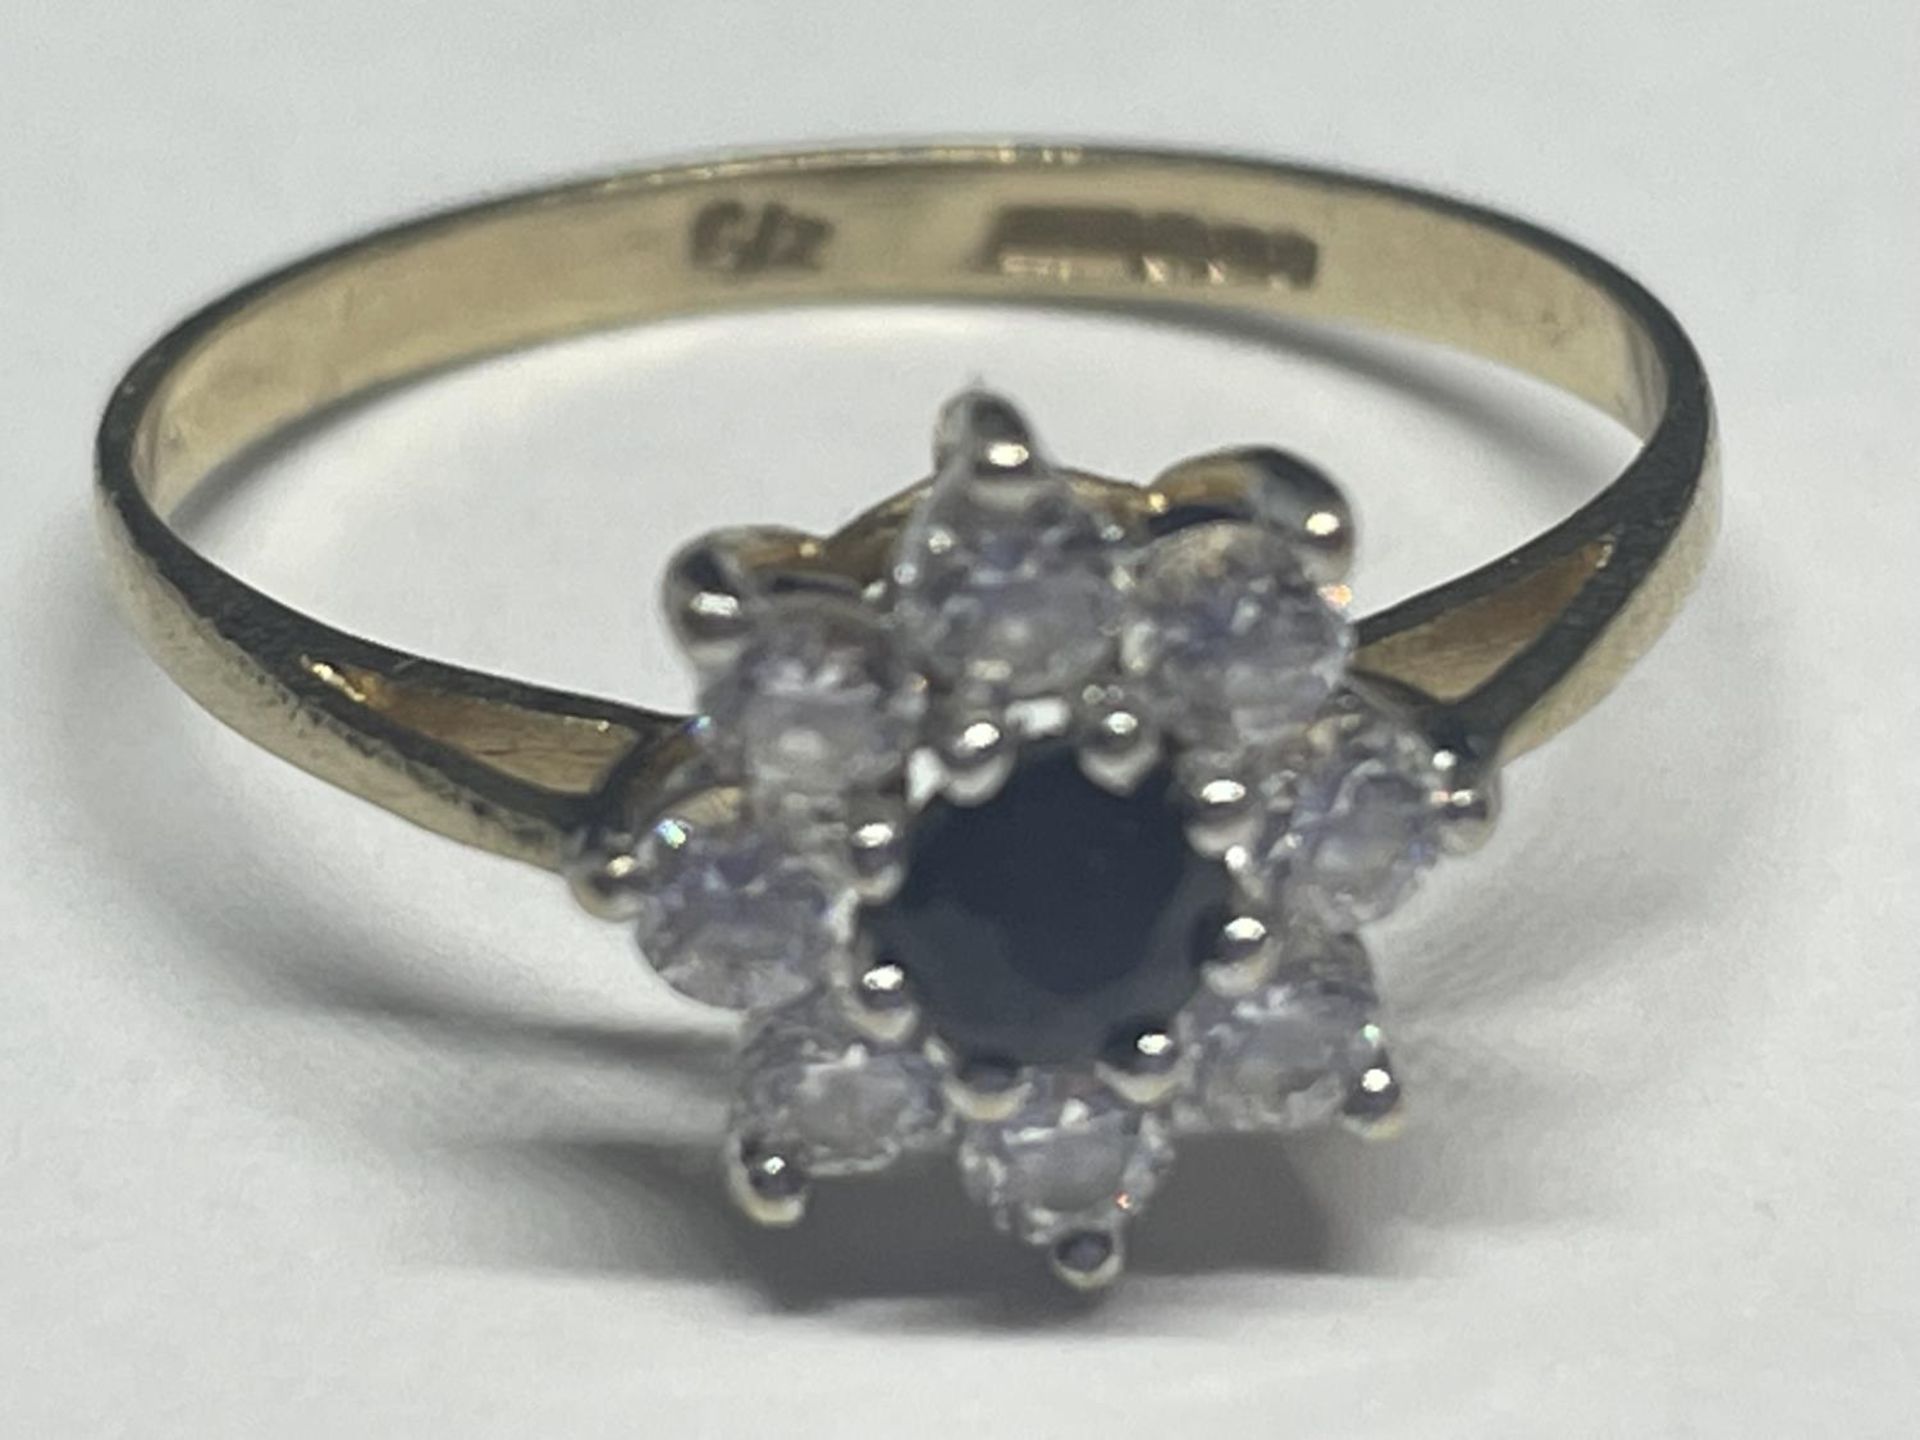 A 9 CARAT GOLD RING WITH A CENTRE SAPPHIRE SURROUNDED BY EIGHT CUBIC ZIRCONIAS IN A FLOWER DESIGN